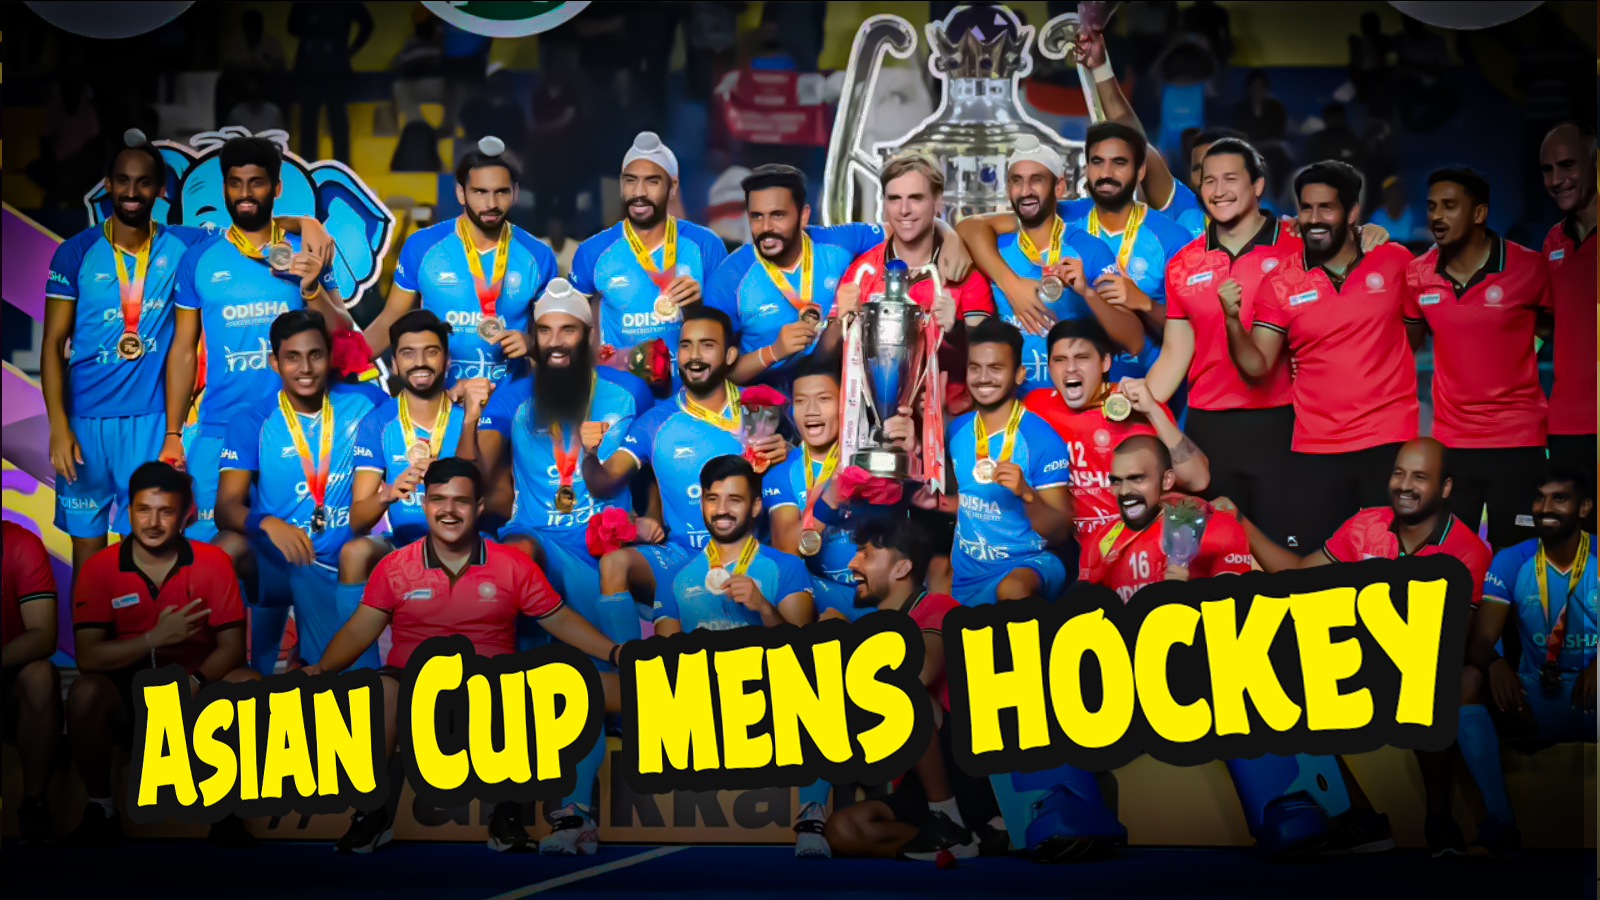 Team India Wins the Asian Cup Men’s Hockey for the 3rd Time: A Triumph of Skill and Determination